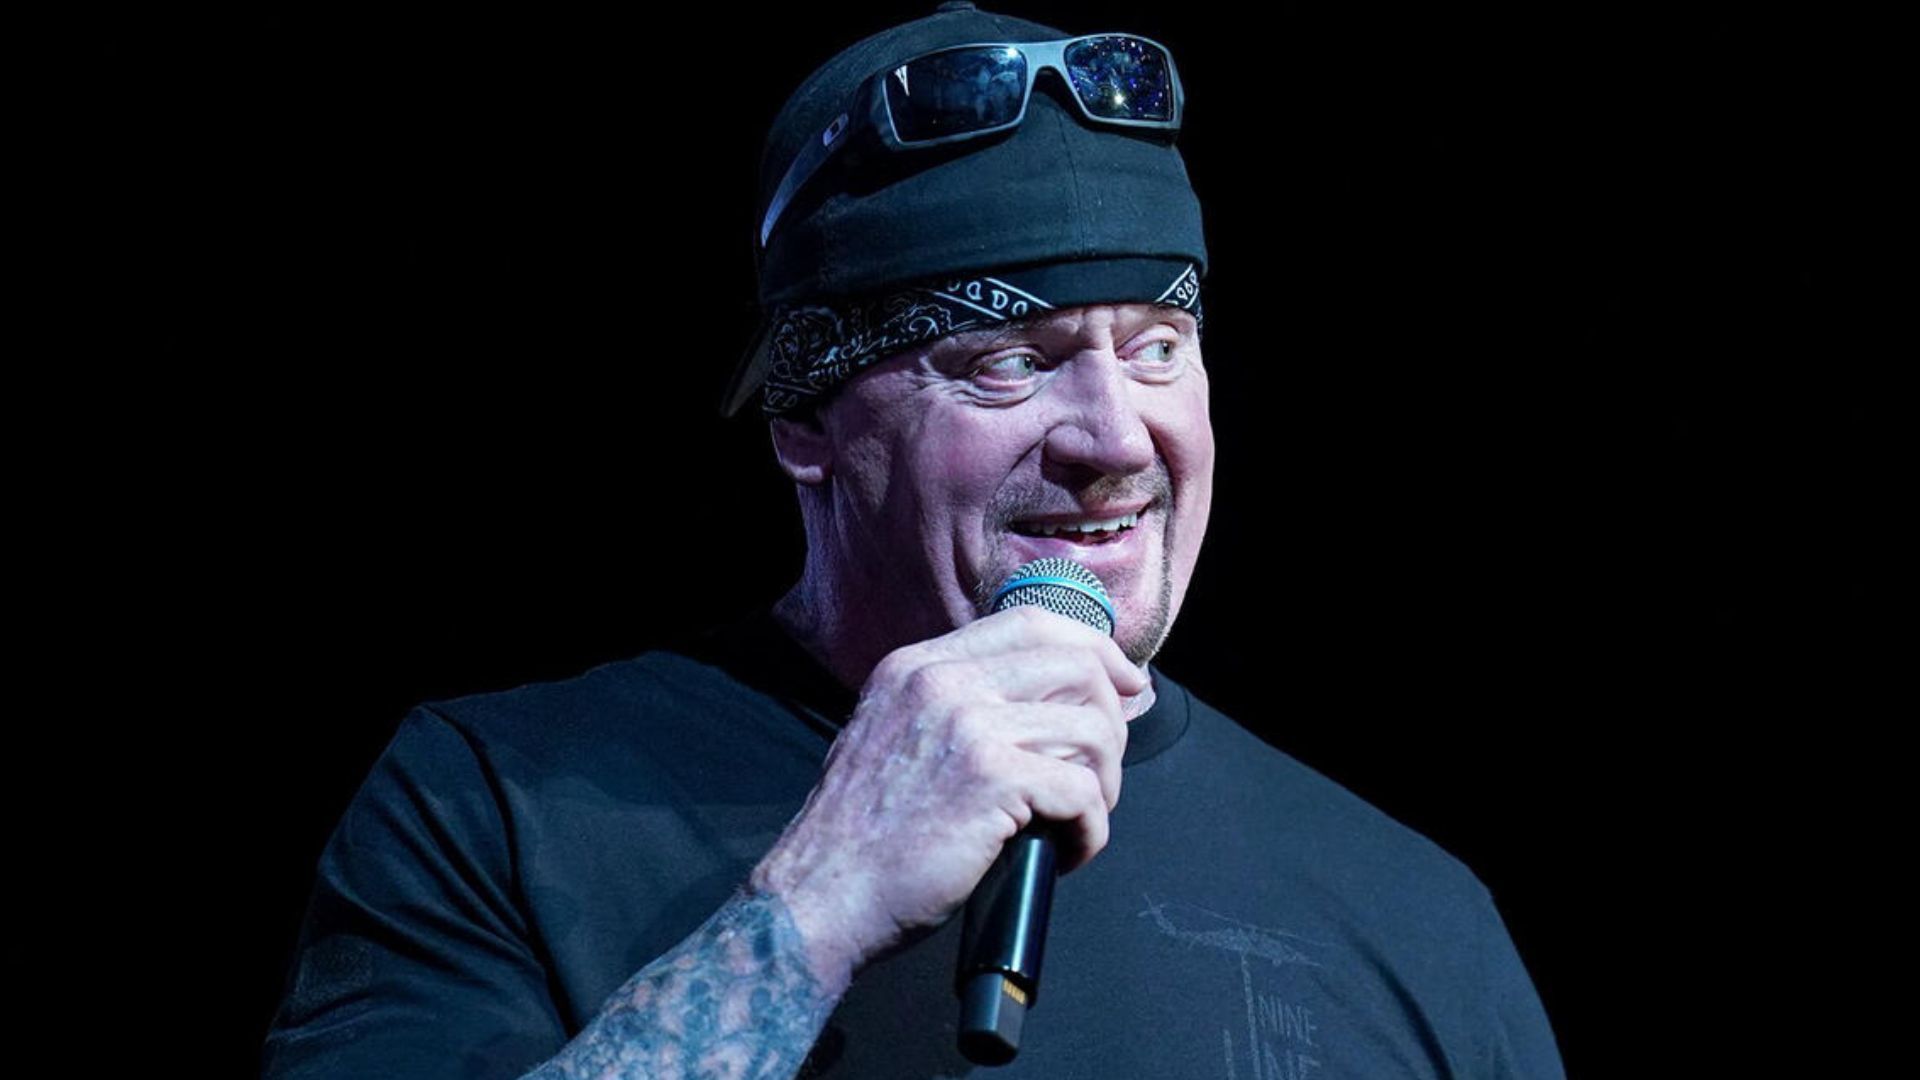 The Undertaker retired from in-ring competition in 2020 [Photo credit: WWE]